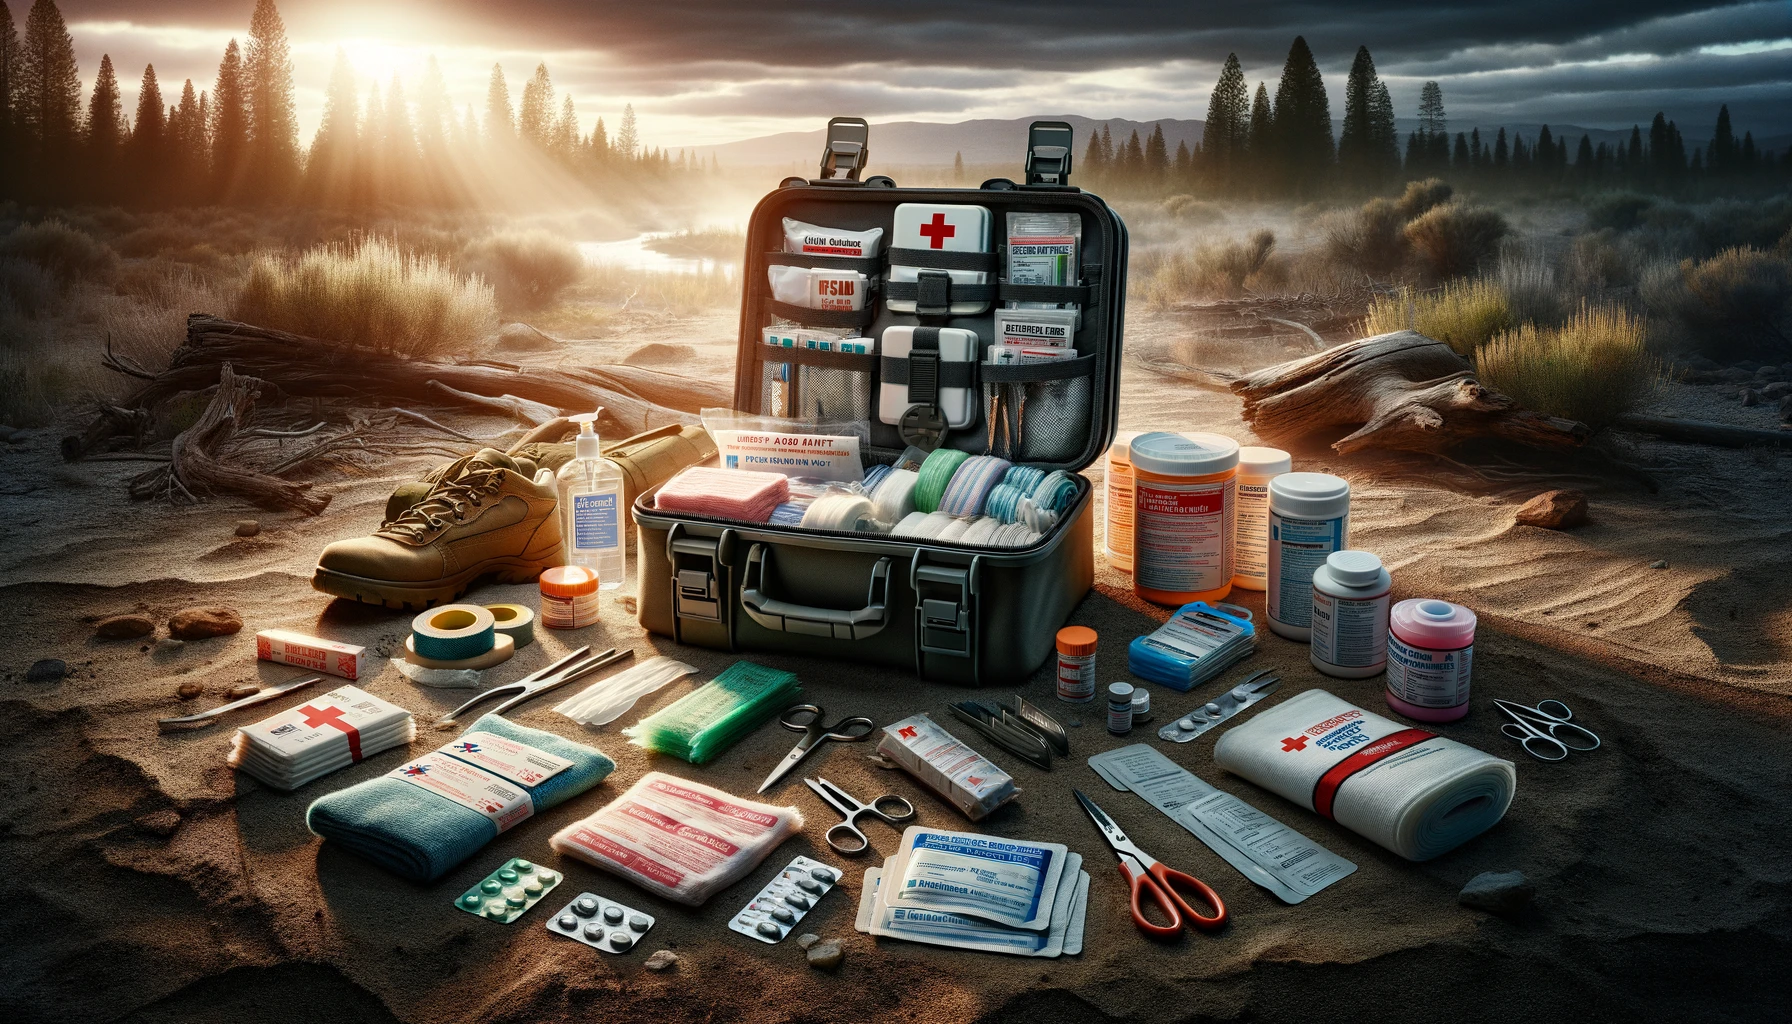 Compelling image of an open first aid kit with essential supplies neatly displayed, including bandages, antiseptic wipes, and emergency medications, set against a wild outdoor backdrop, highlighting the importance of first aid preparedness in survival situations